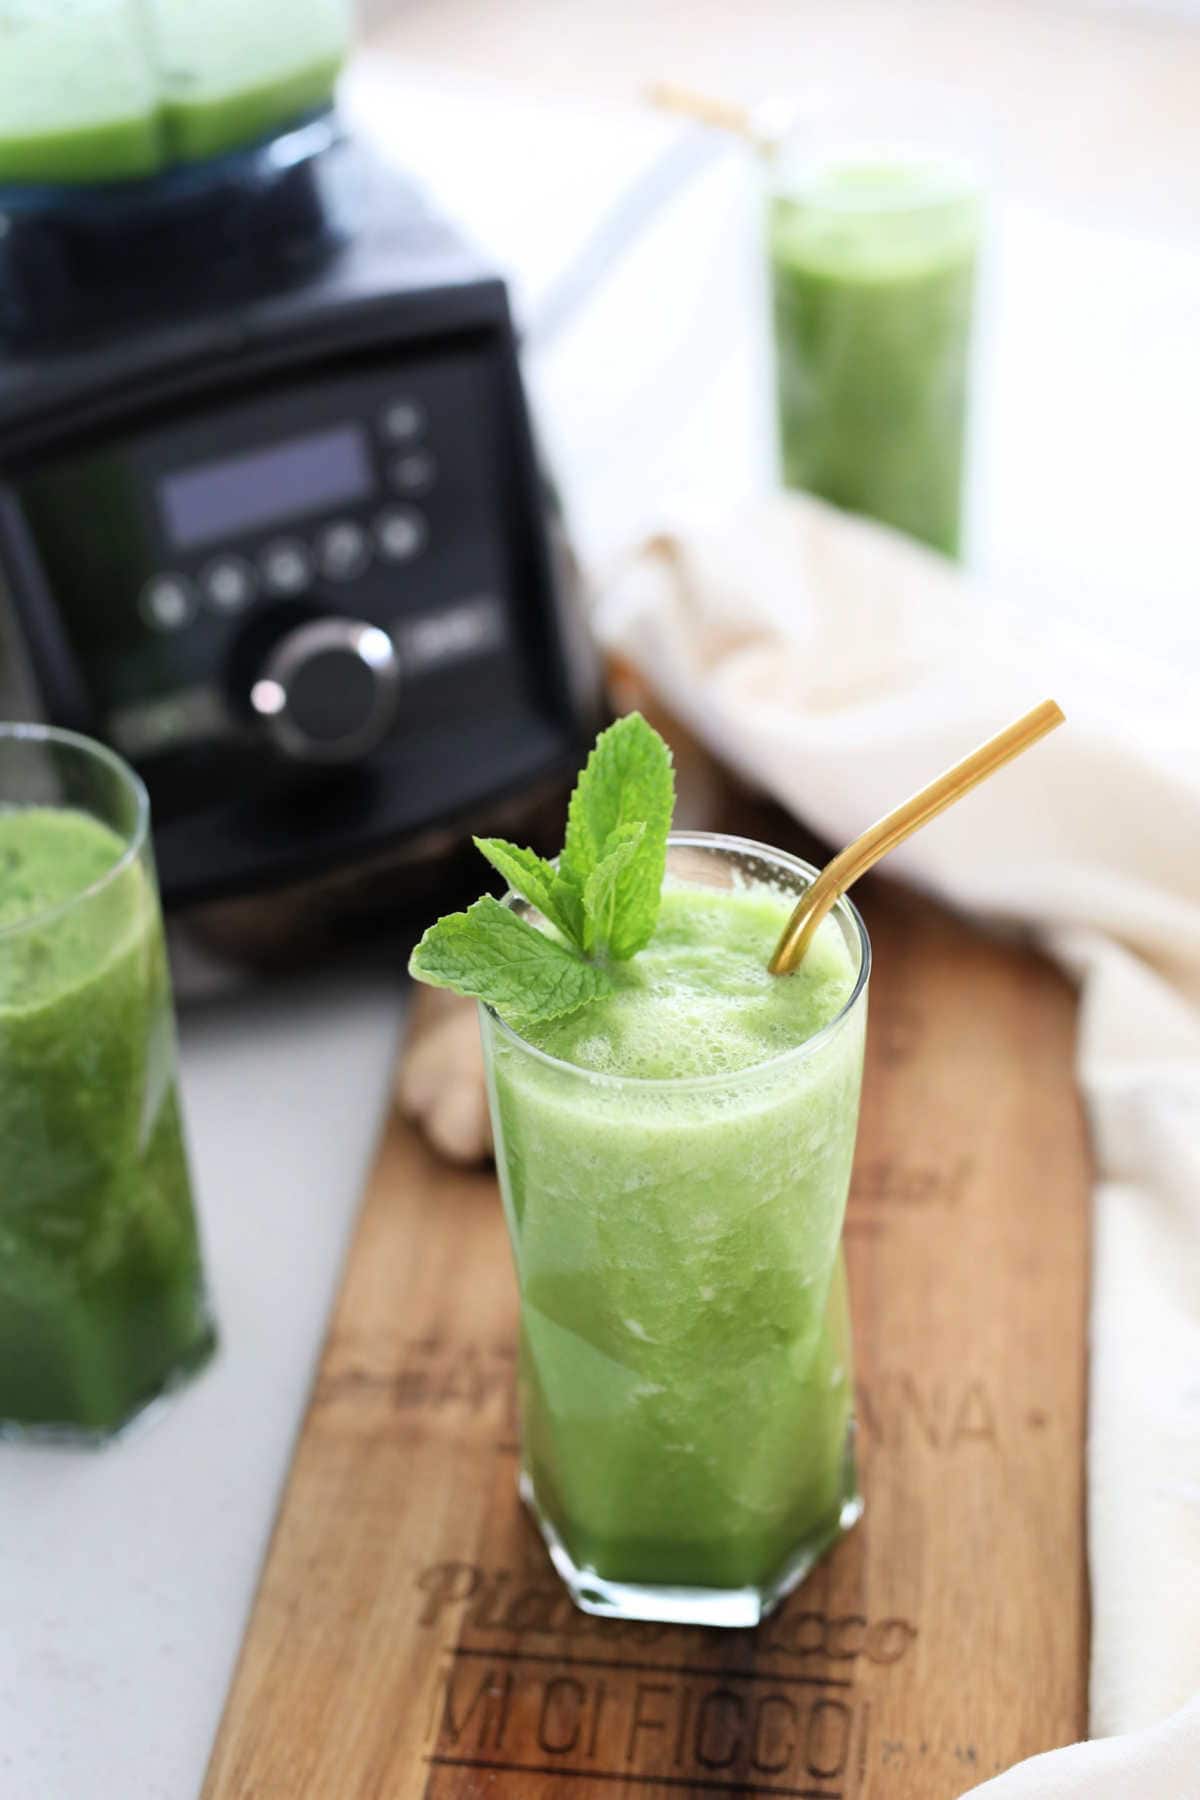 Green juiced recipes in glasses on a cutting board and counter next a Vitamix blender.